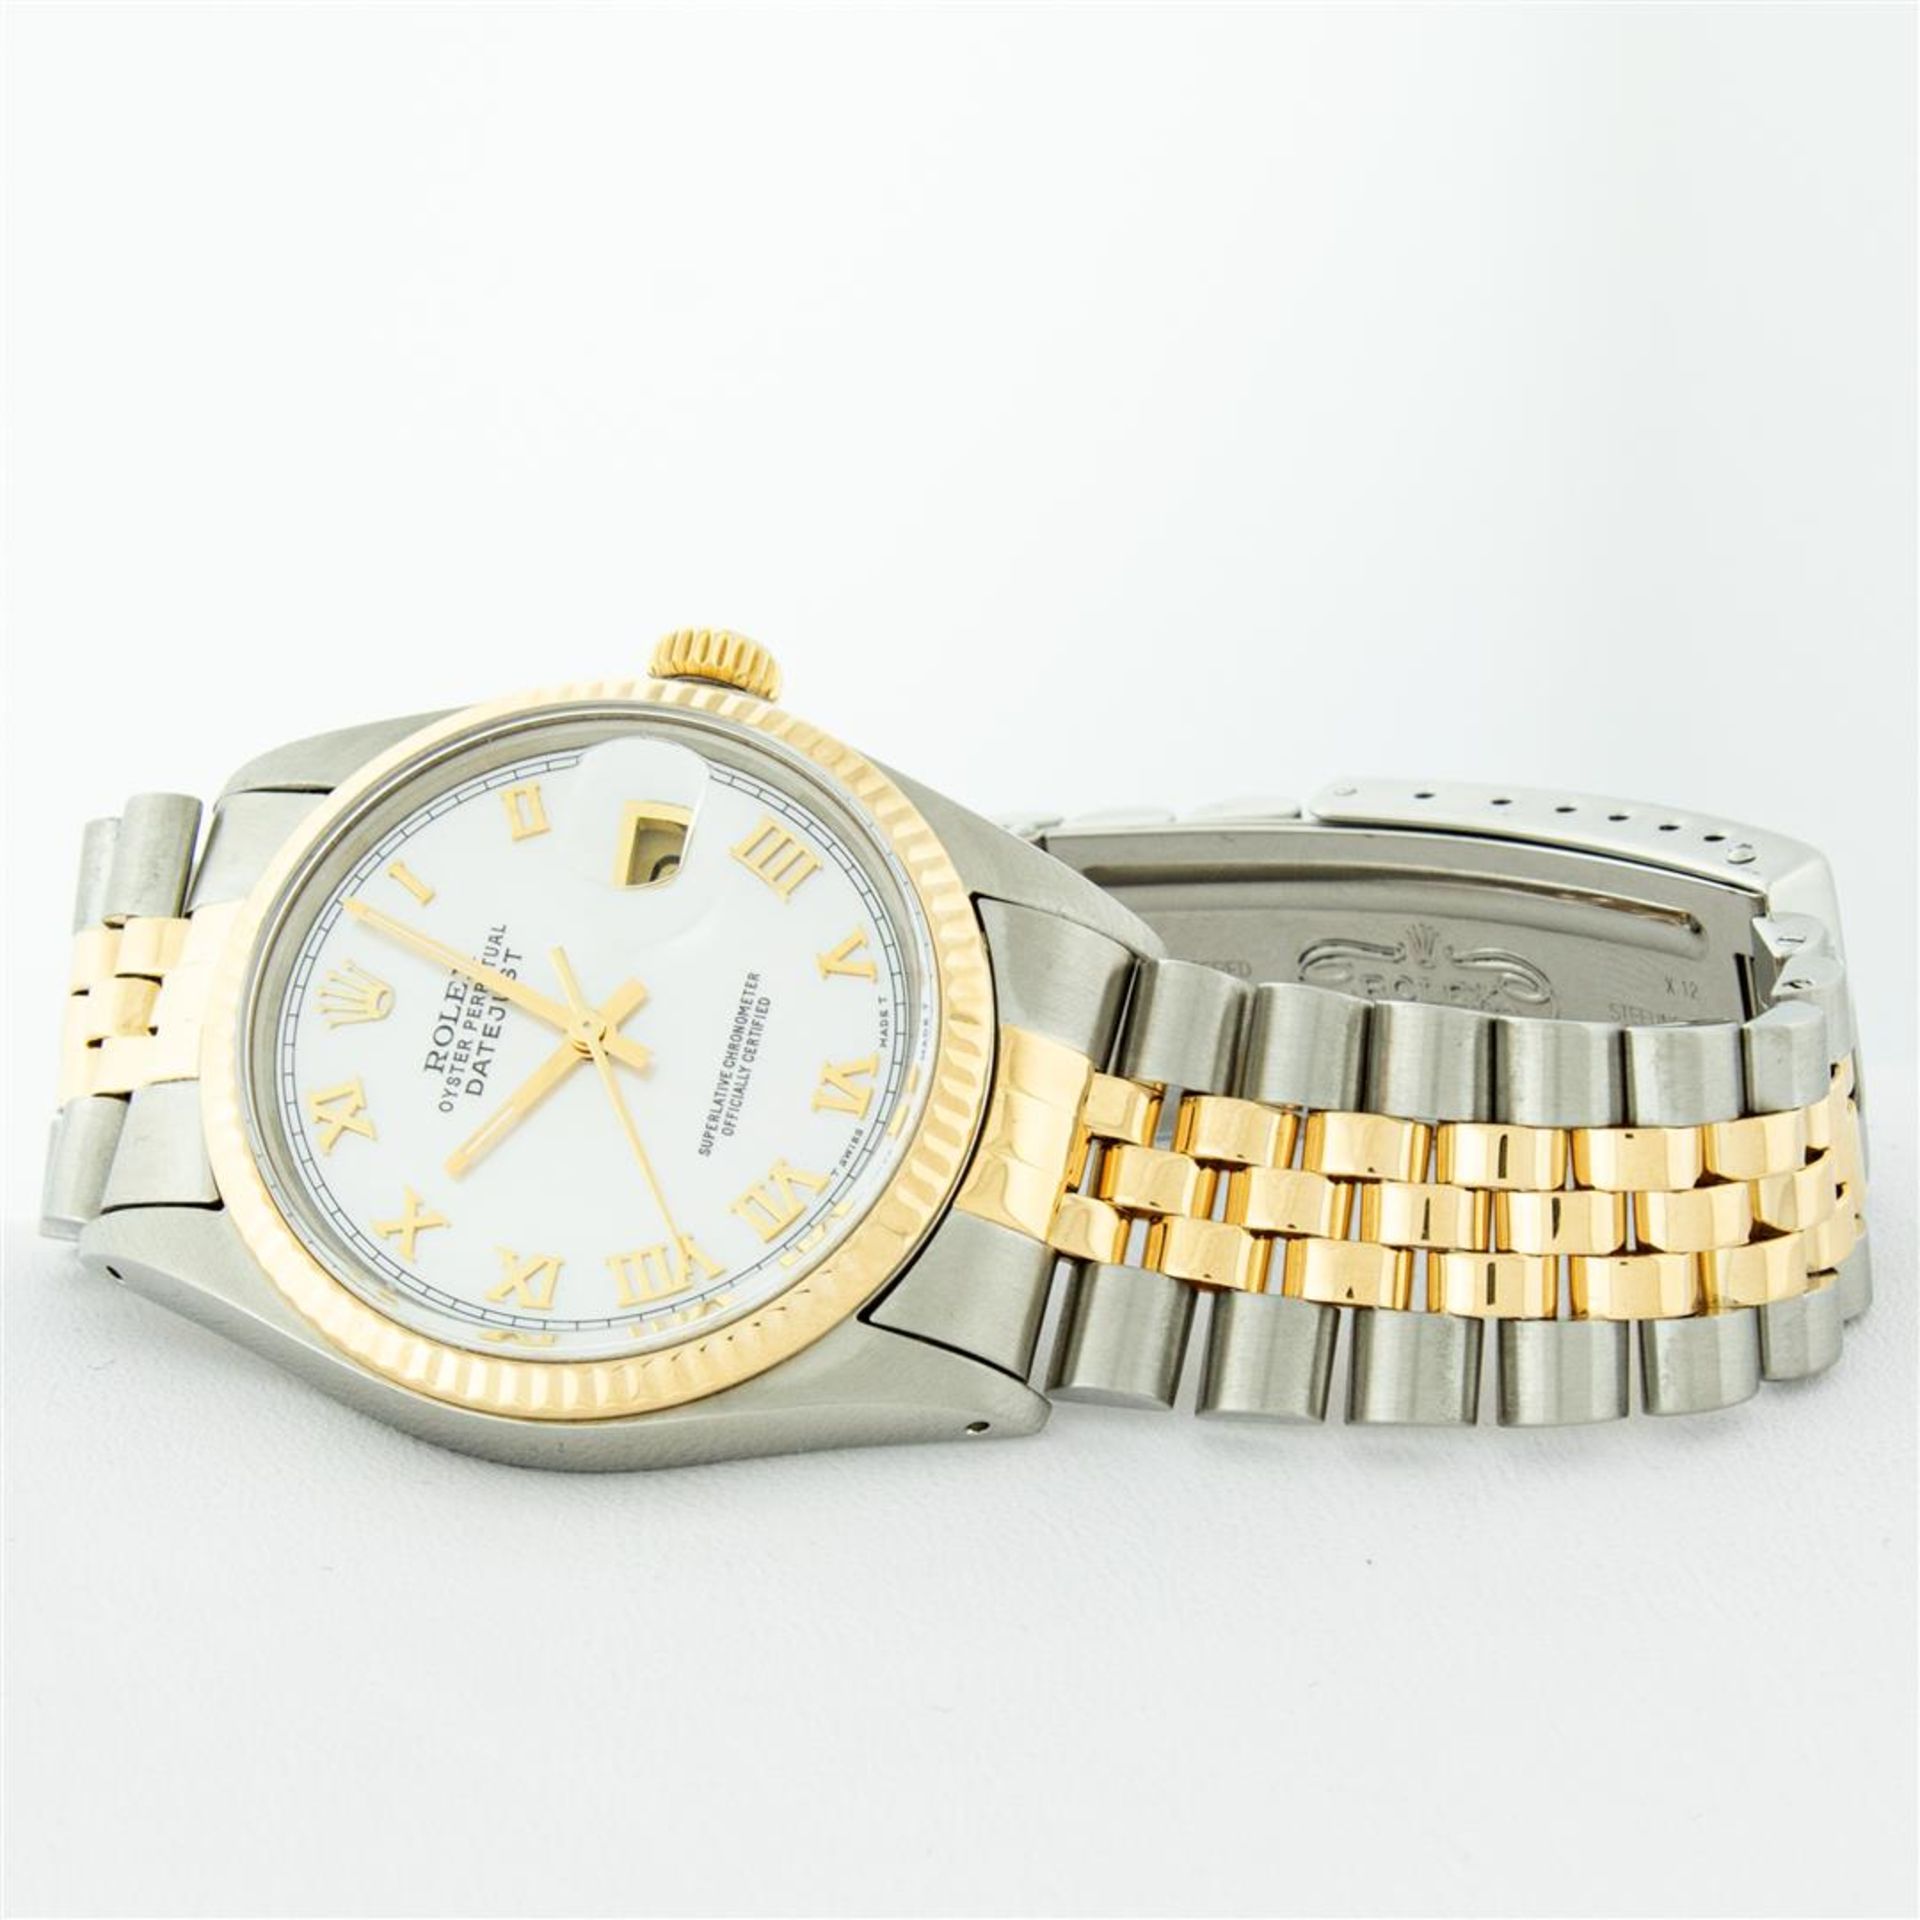 Rolex Mens 2 Tone Mother Of Pearl Roman Datejust Wristwatch - Image 8 of 9